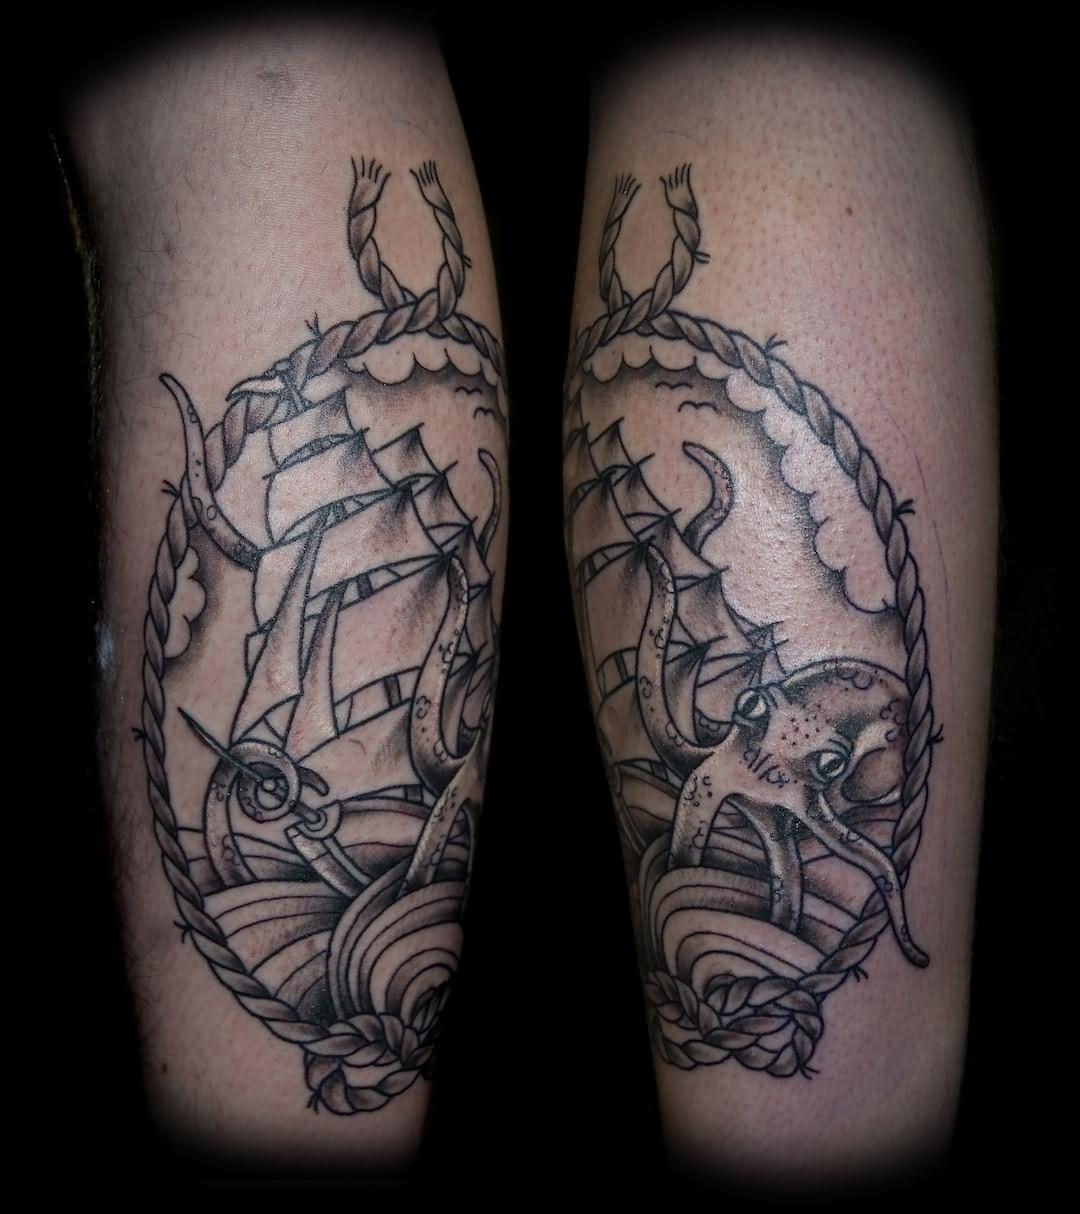 Black Ink Octopus With Ship In Rope Frame Tattoo Design For Leg